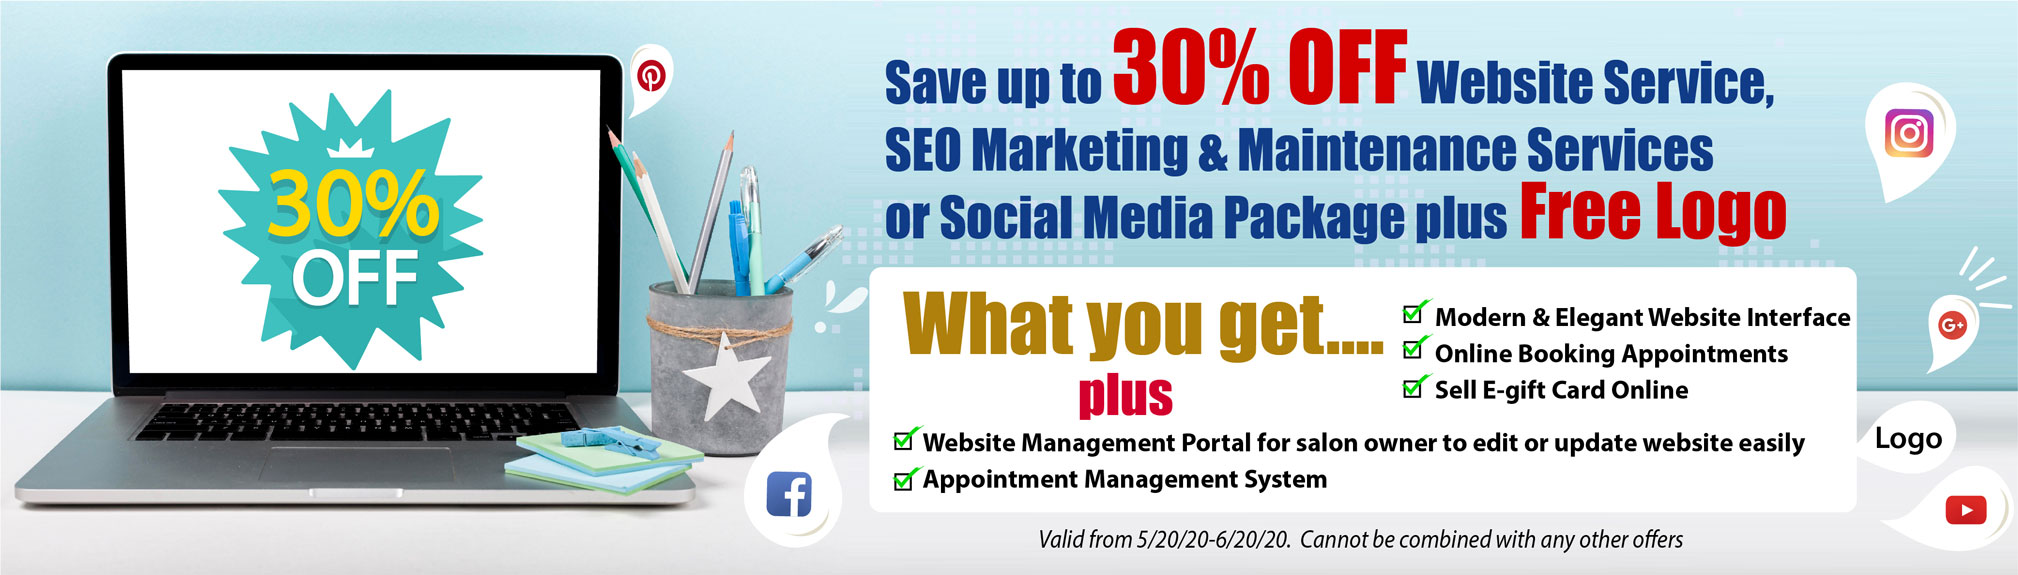 Save up to 30% OFF Website Services